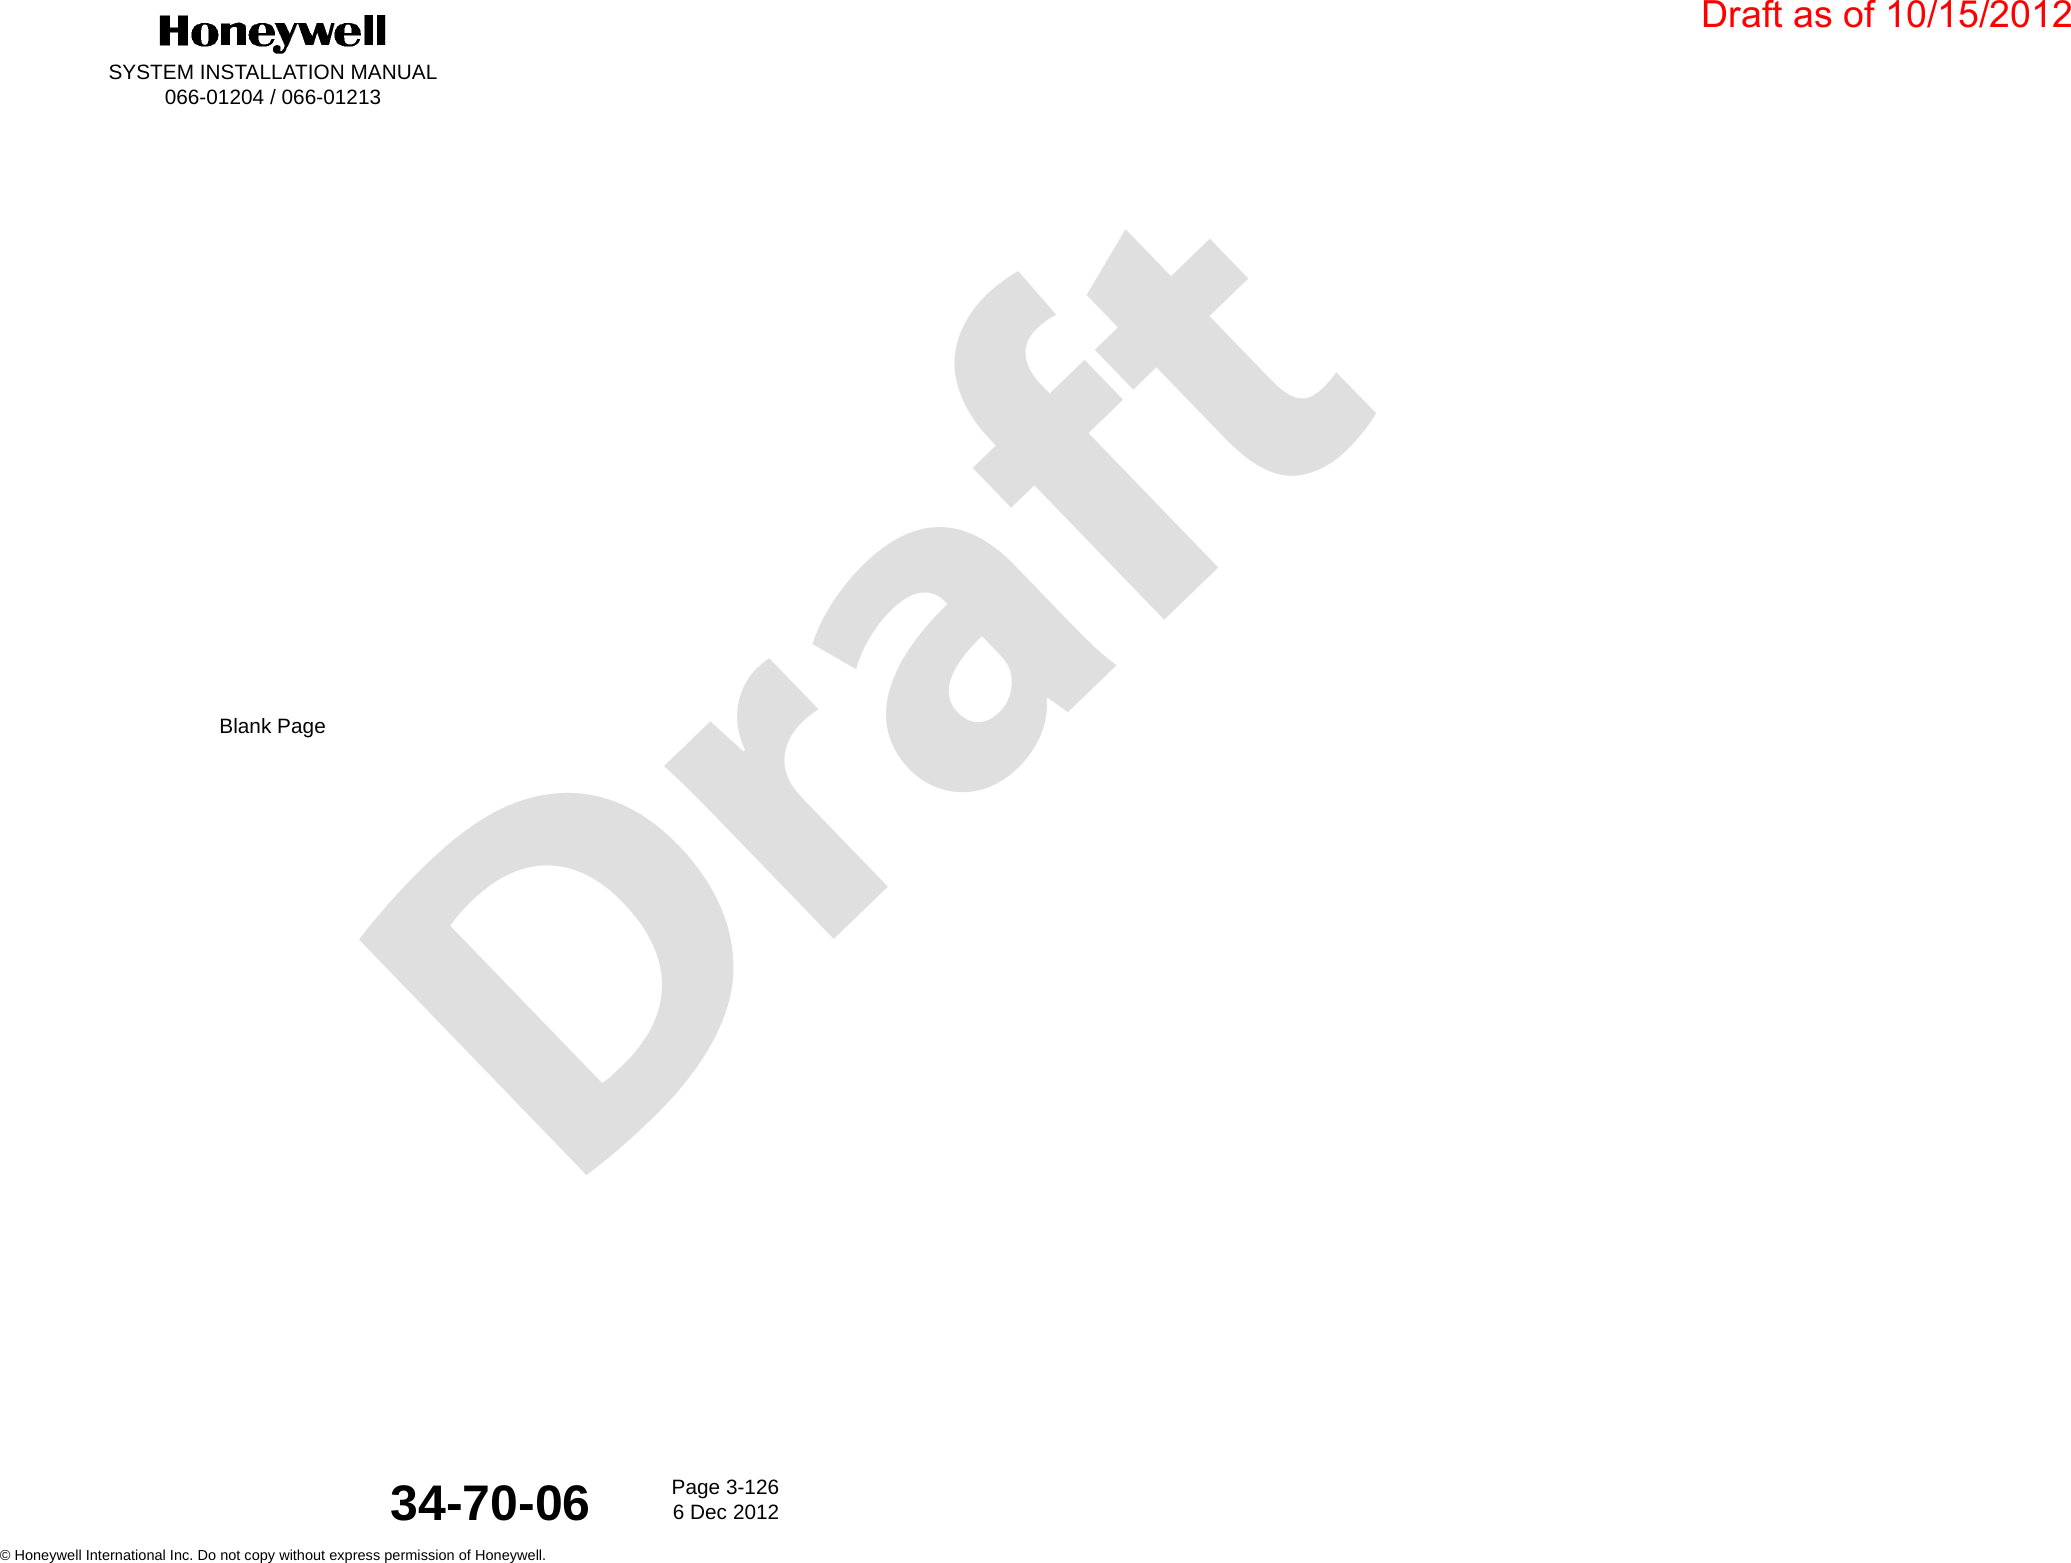 DraftSYSTEM INSTALLATION MANUAL066-01204 / 066-01213Page 3-1266 Dec 2012© Honeywell International Inc. Do not copy without express permission of Honeywell.34-70-06Blank PageDraft as of 10/15/2012